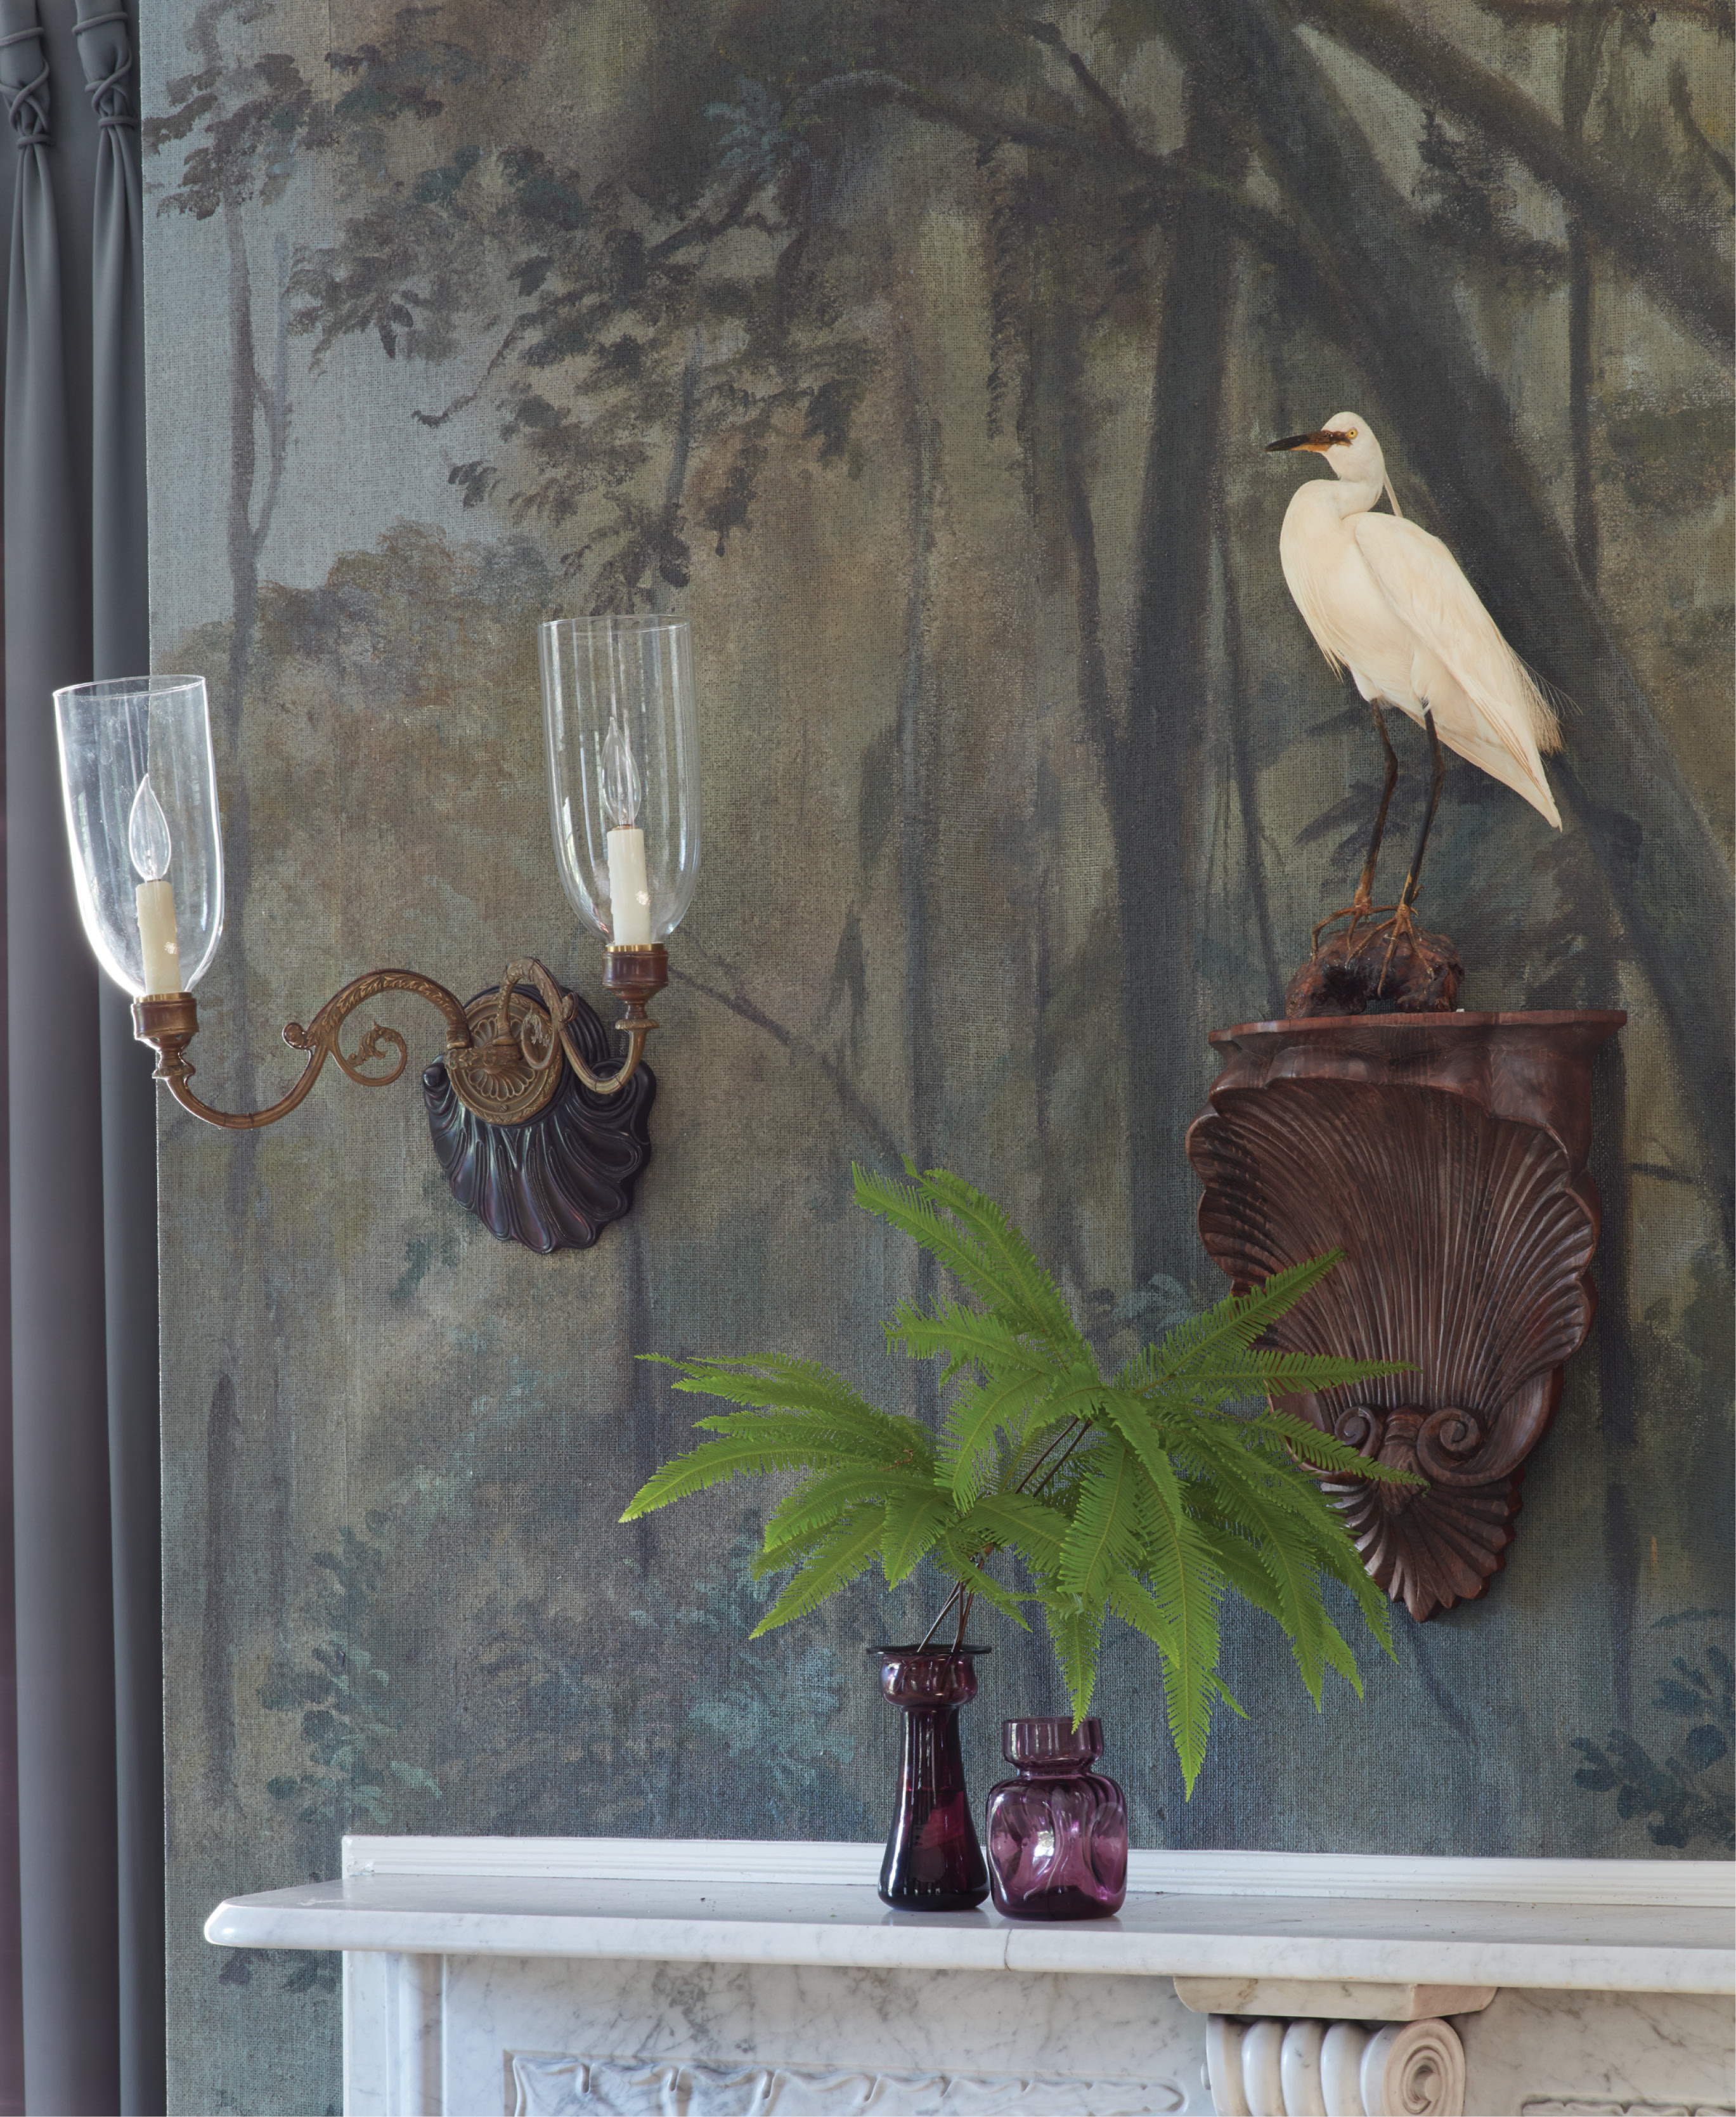 This hand-painted mural of a cypress swamp by artist Raymond Goins provided a unique starting point for a thoughtful re-imagining of an 18th-century single house’s dated interiors.